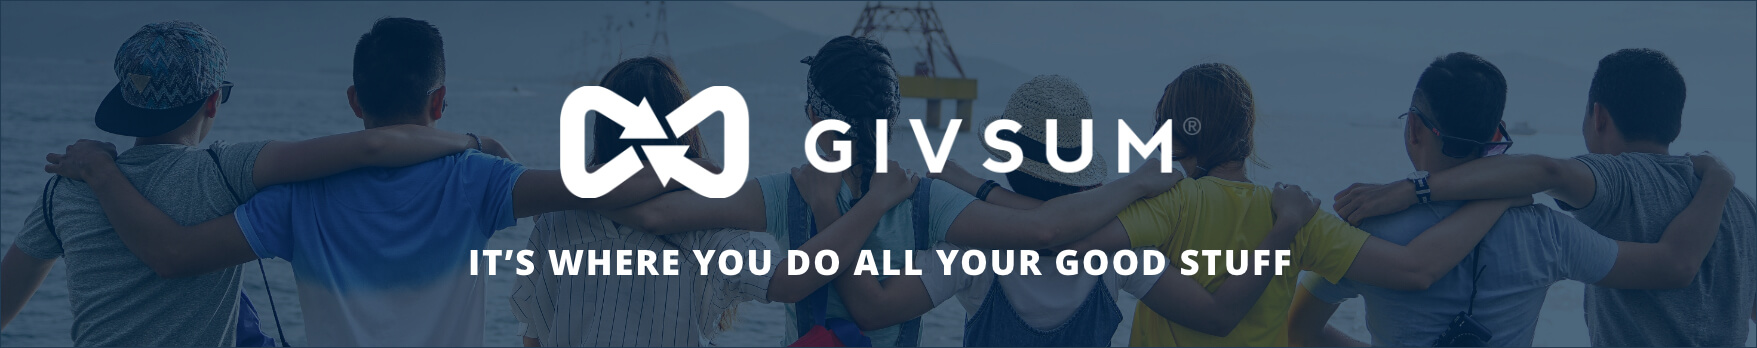 RCWLV | What We Do | Givsum                         
